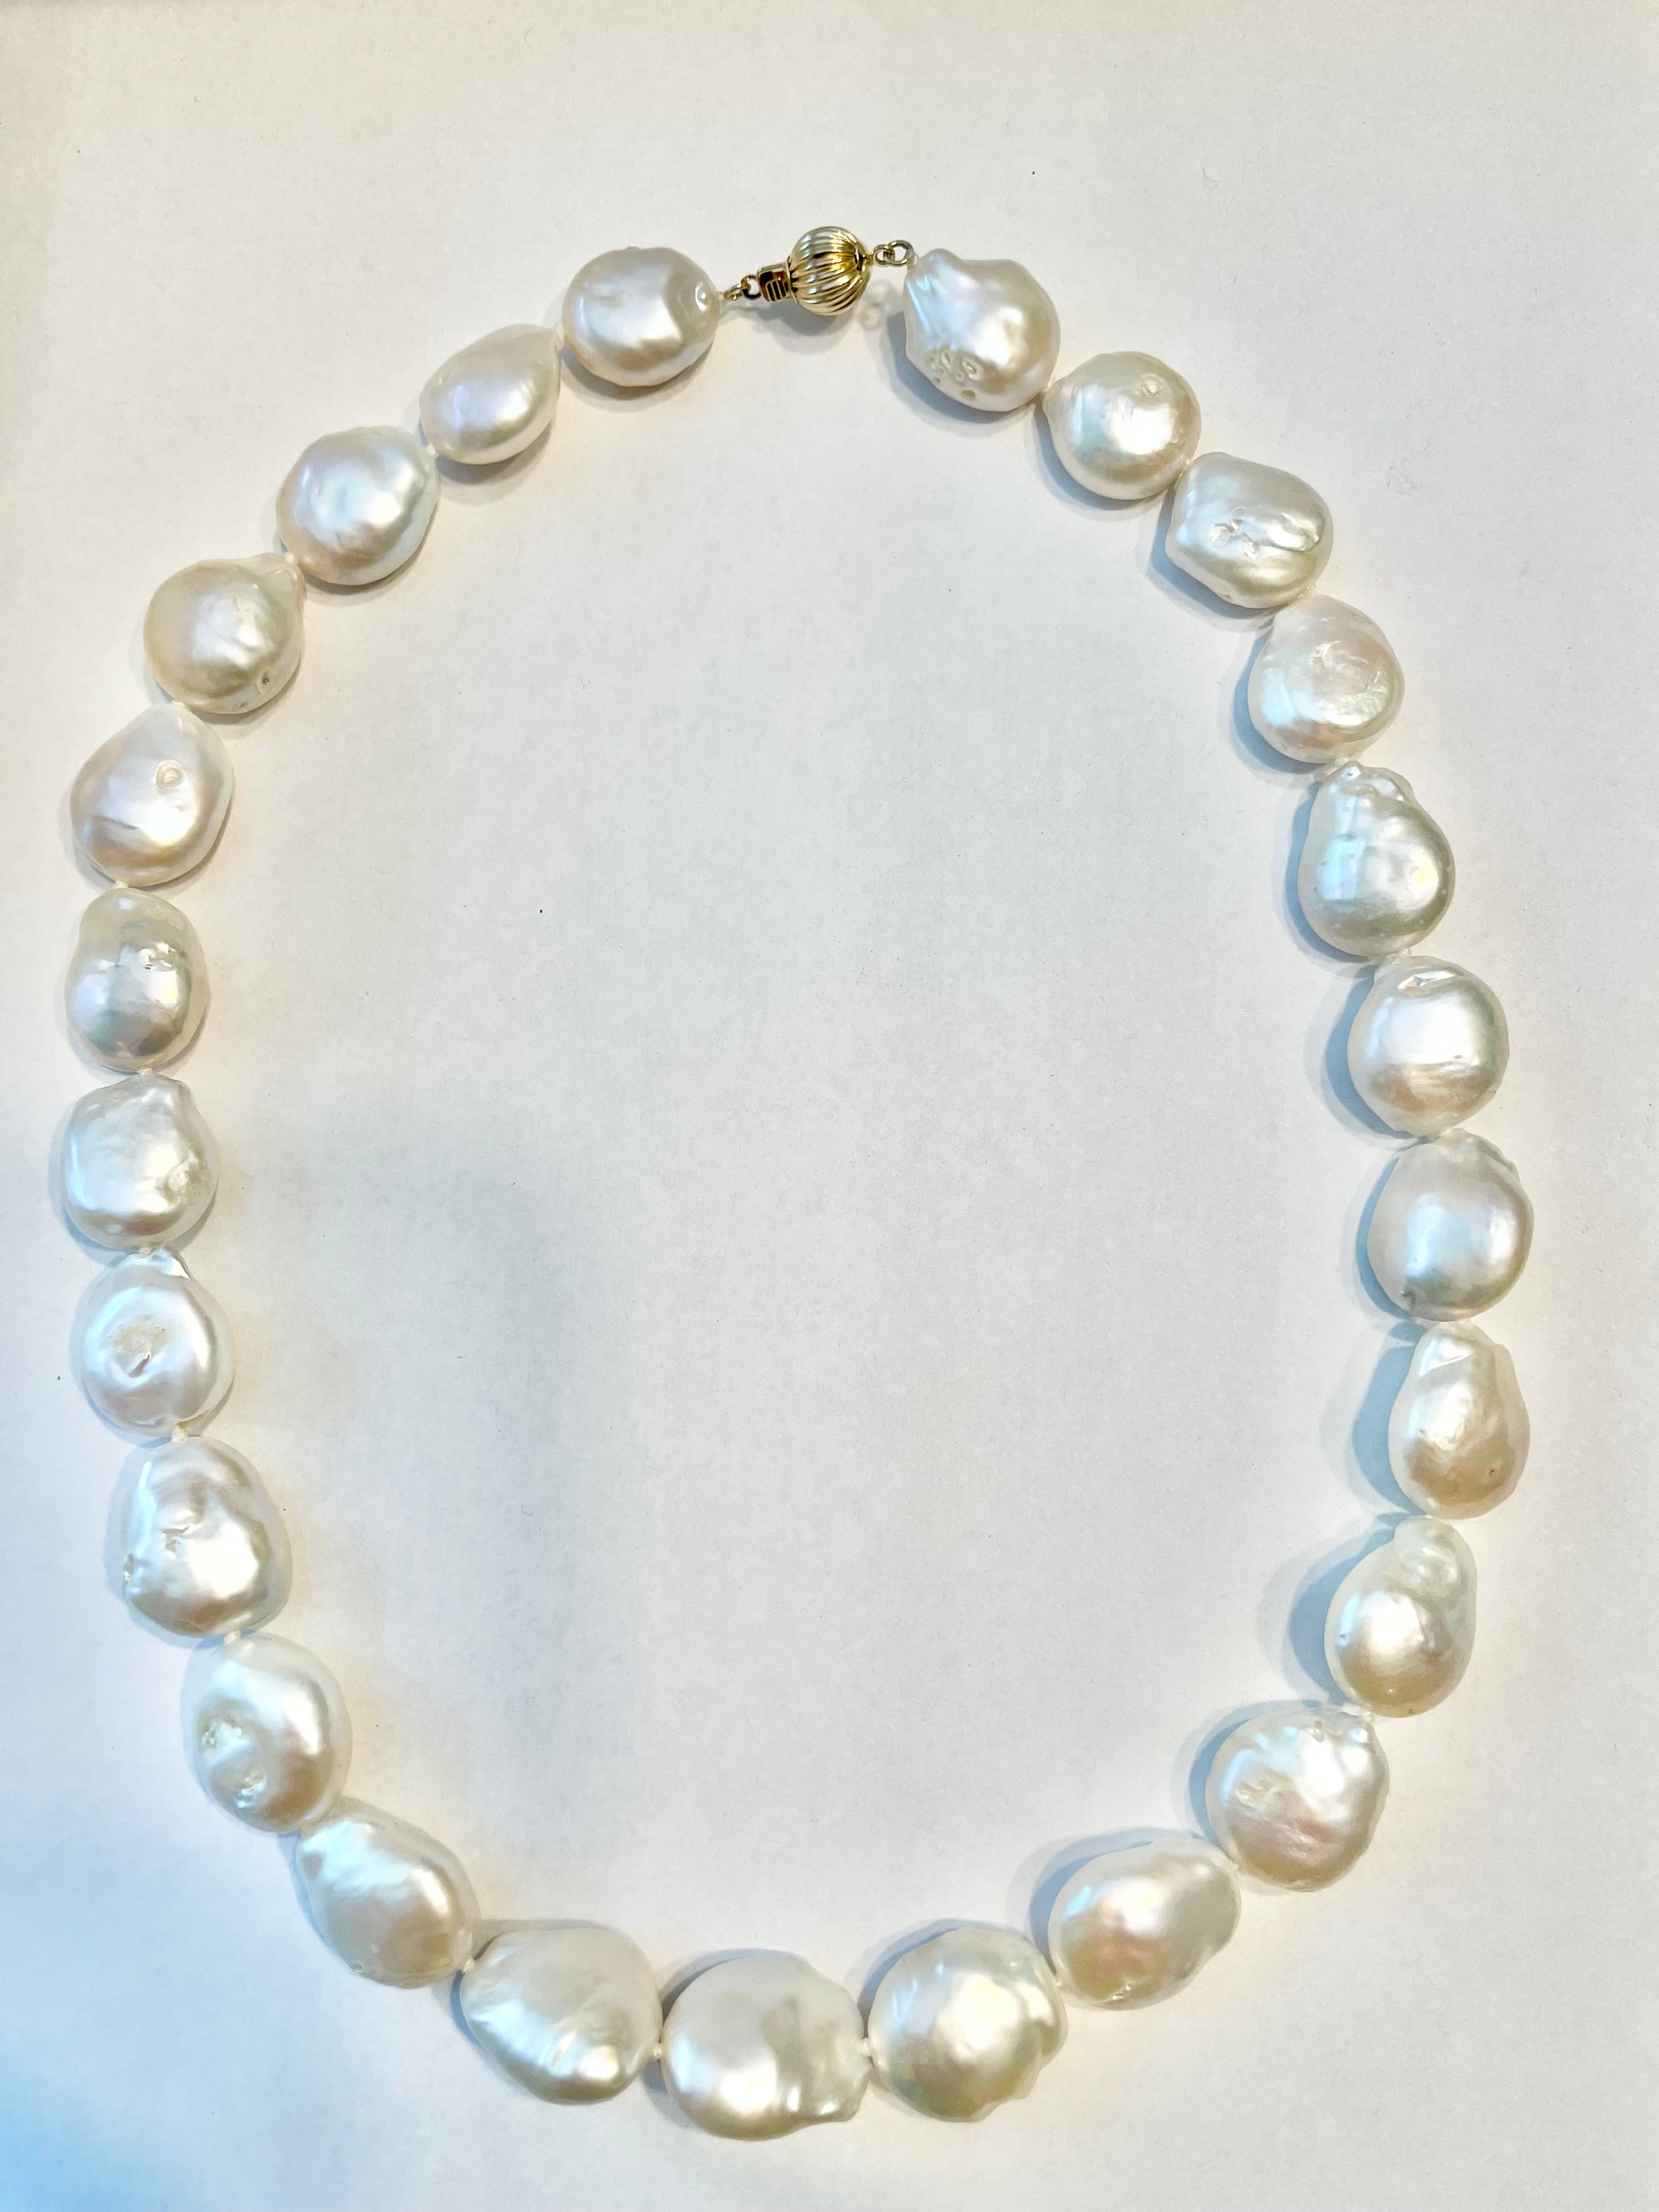 Isn't she Charming!!! This extraordinary genuine baroque fresh water pearls is a true classic for any lady to adore!